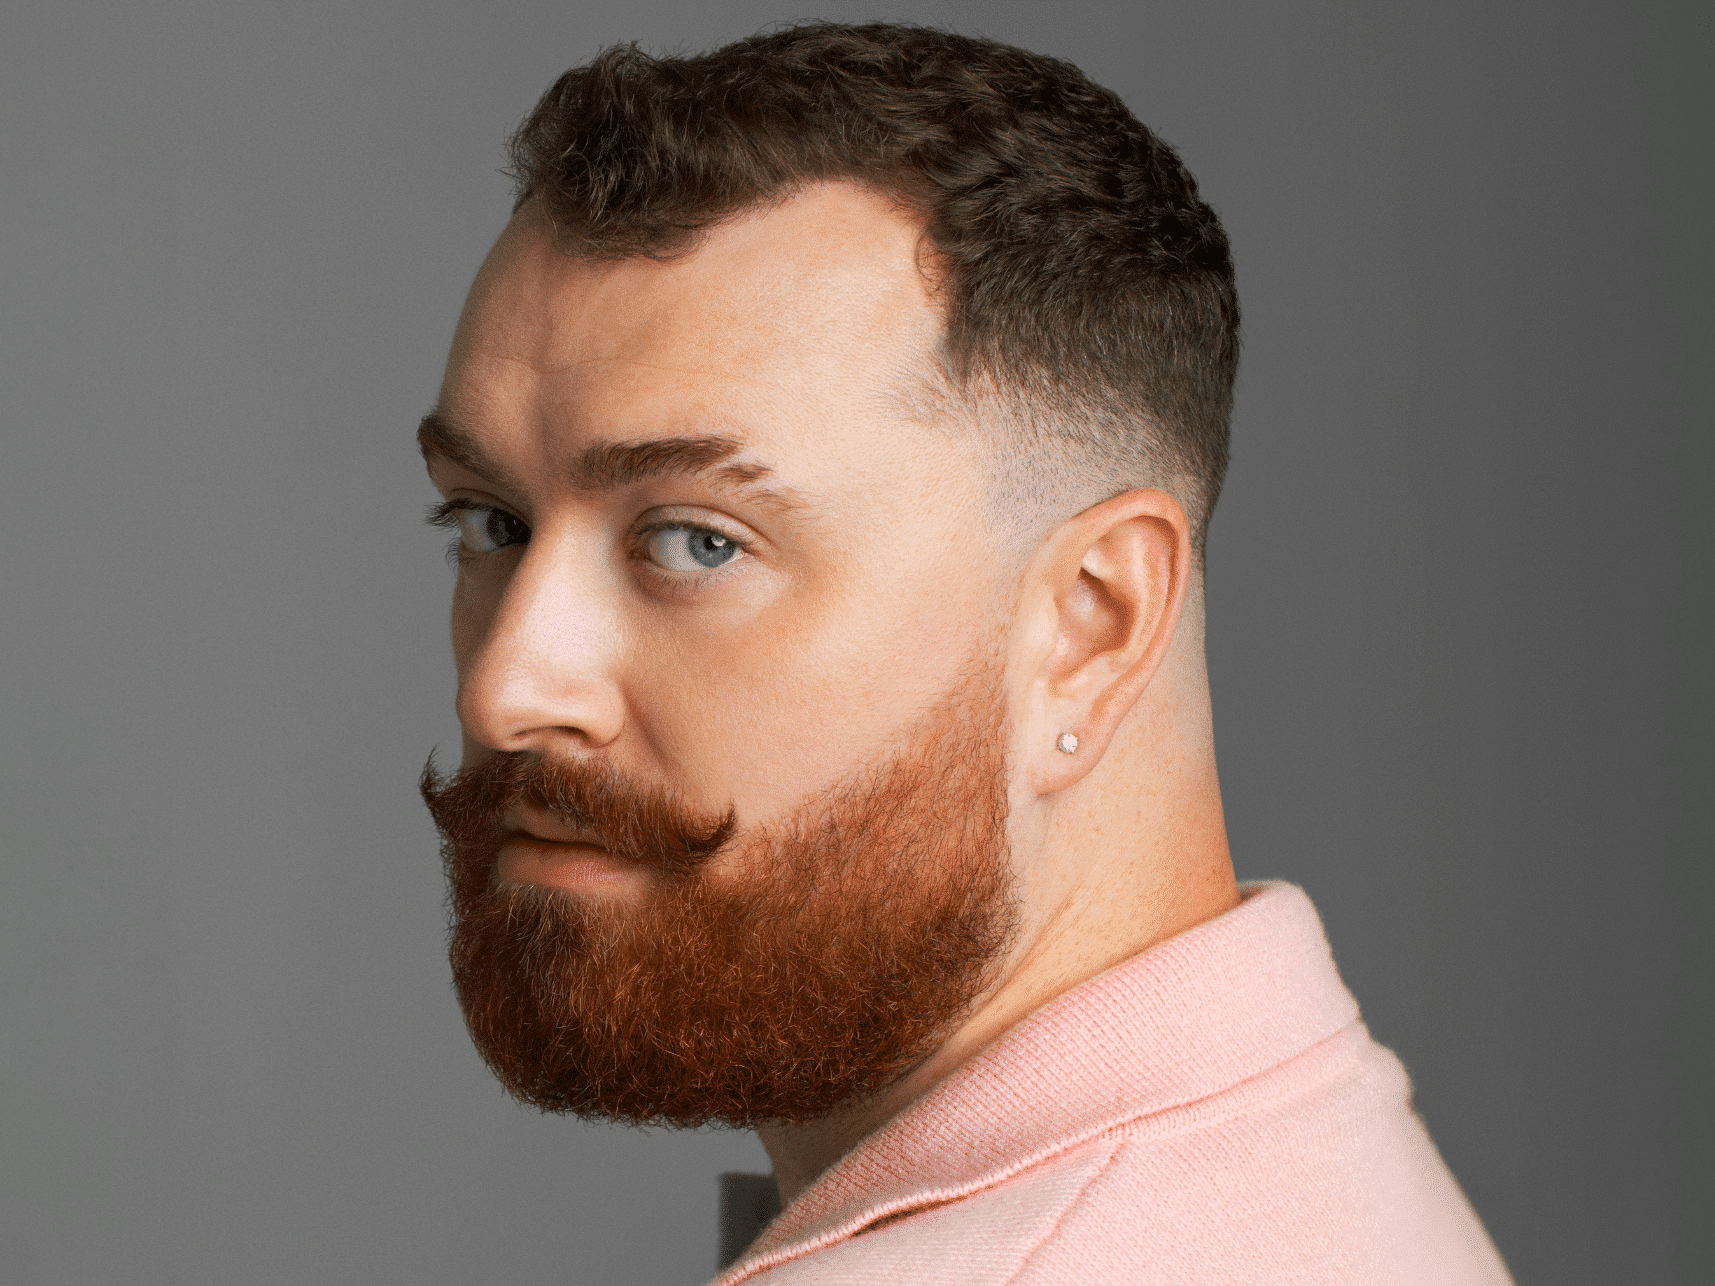 Sam Smith in pink collared shirt, looking over shoulder